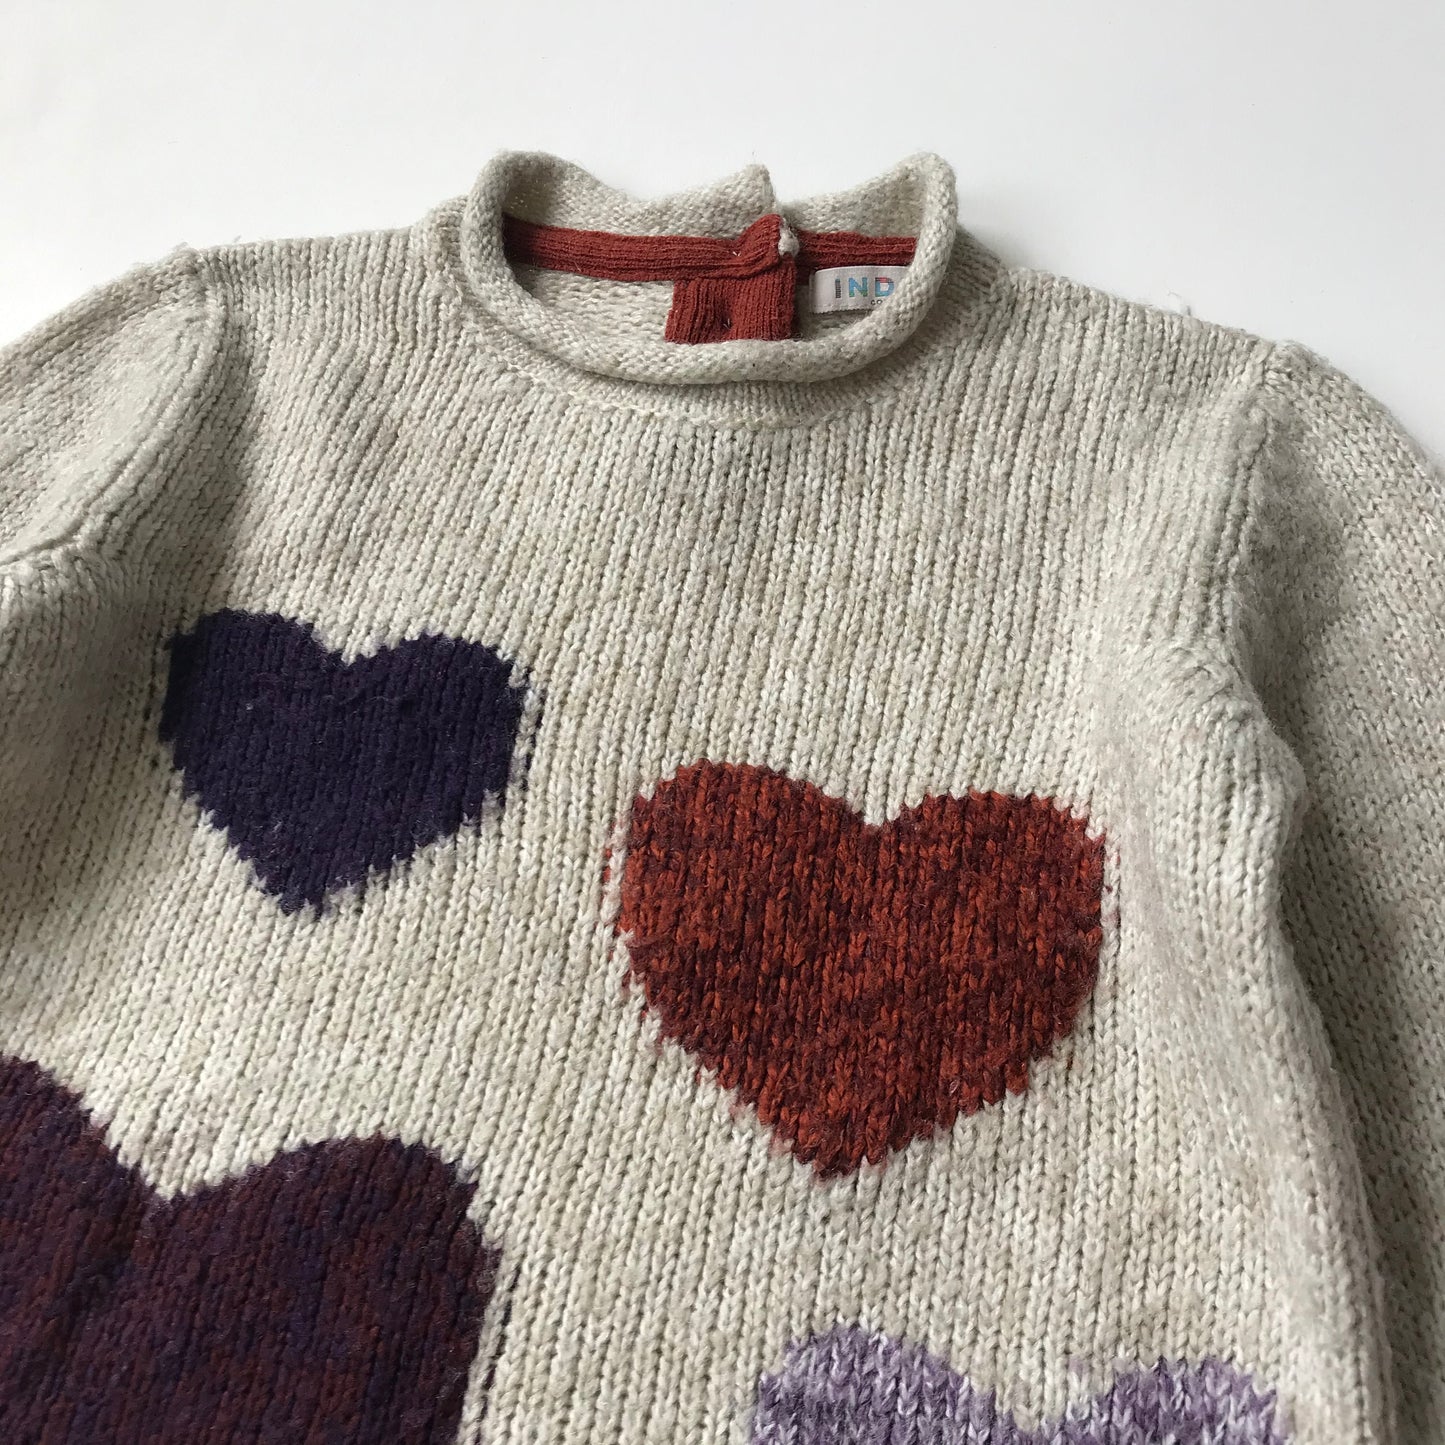 Jumper - Hearts - Age 5